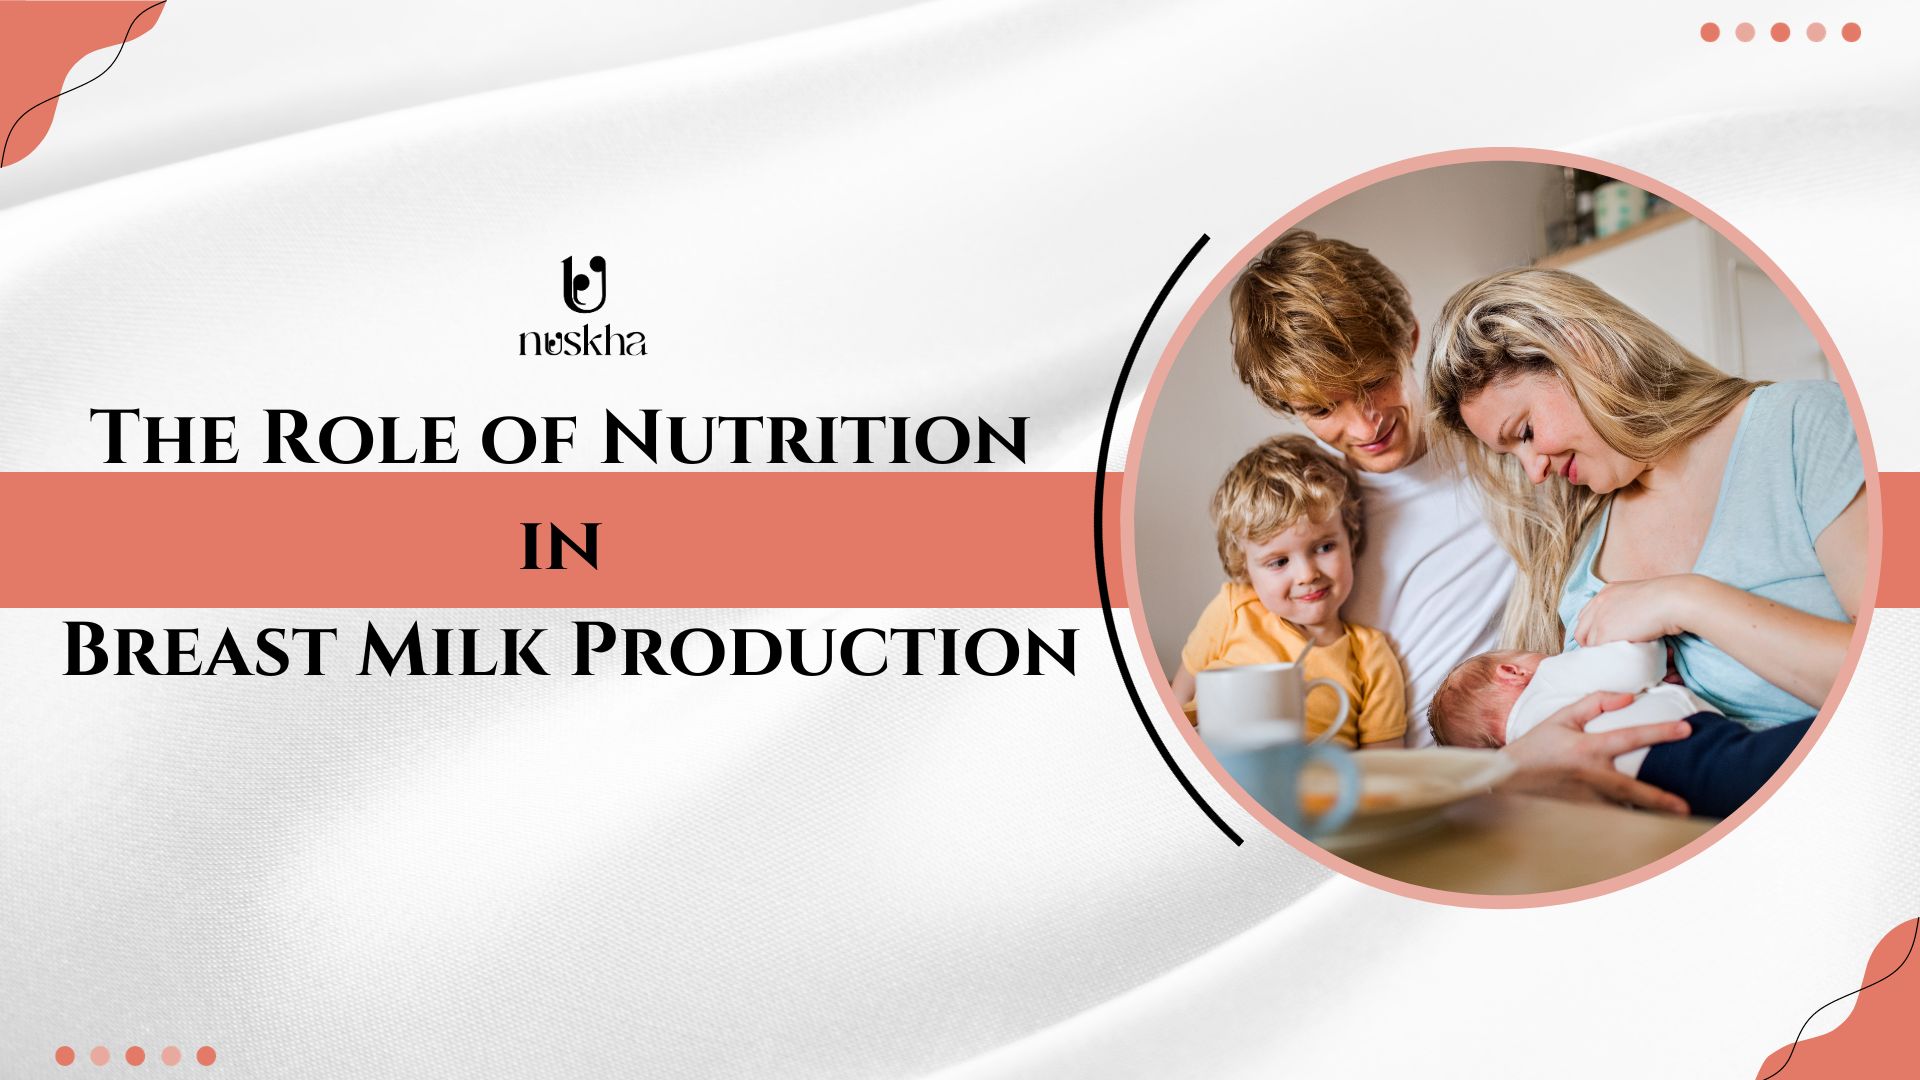 The Role of Nutrition in Breast Milk Production